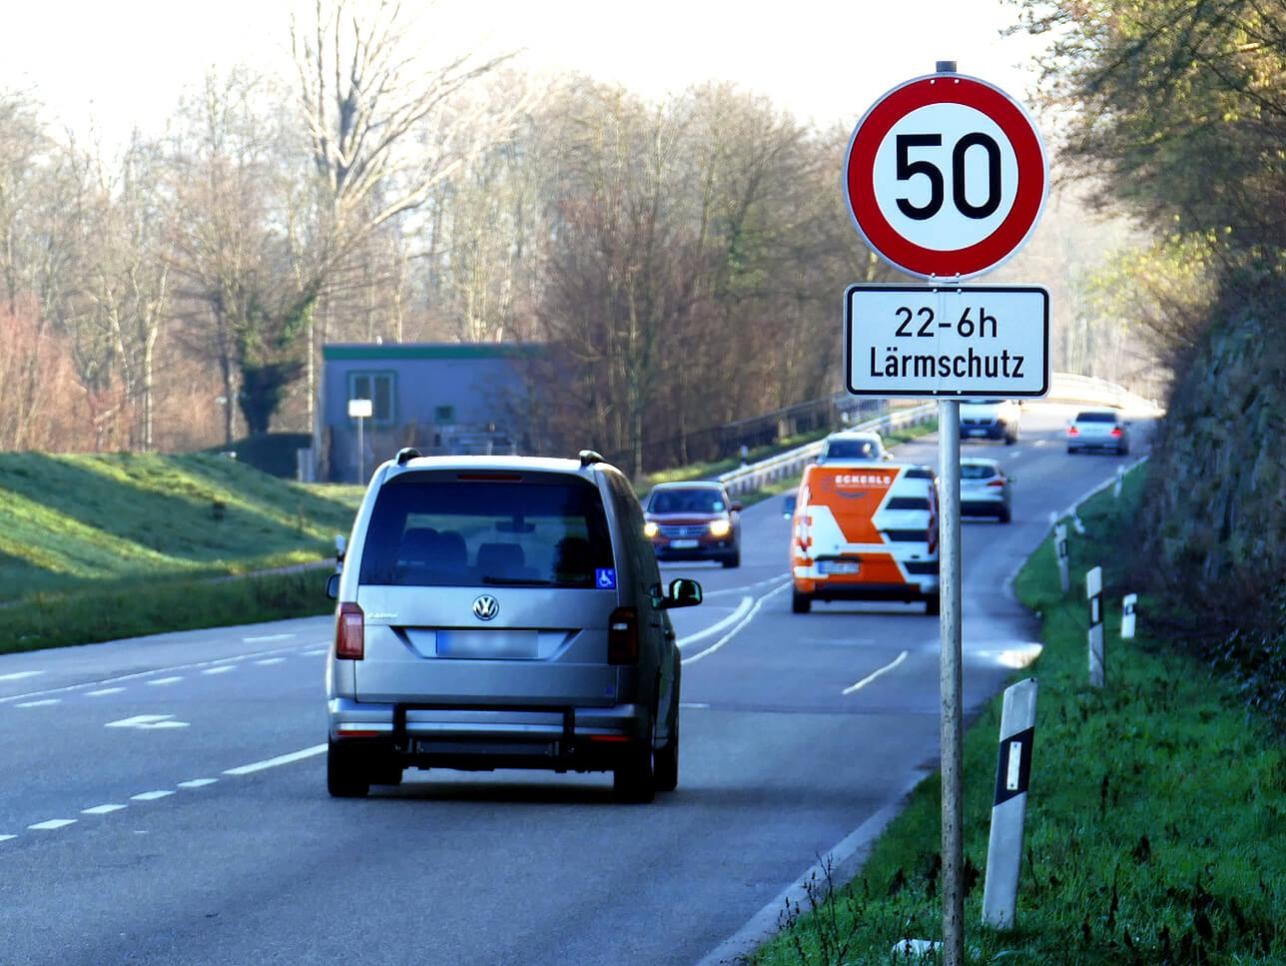 Road in Rastatt with cars, speed limit 50 and noise protection sign